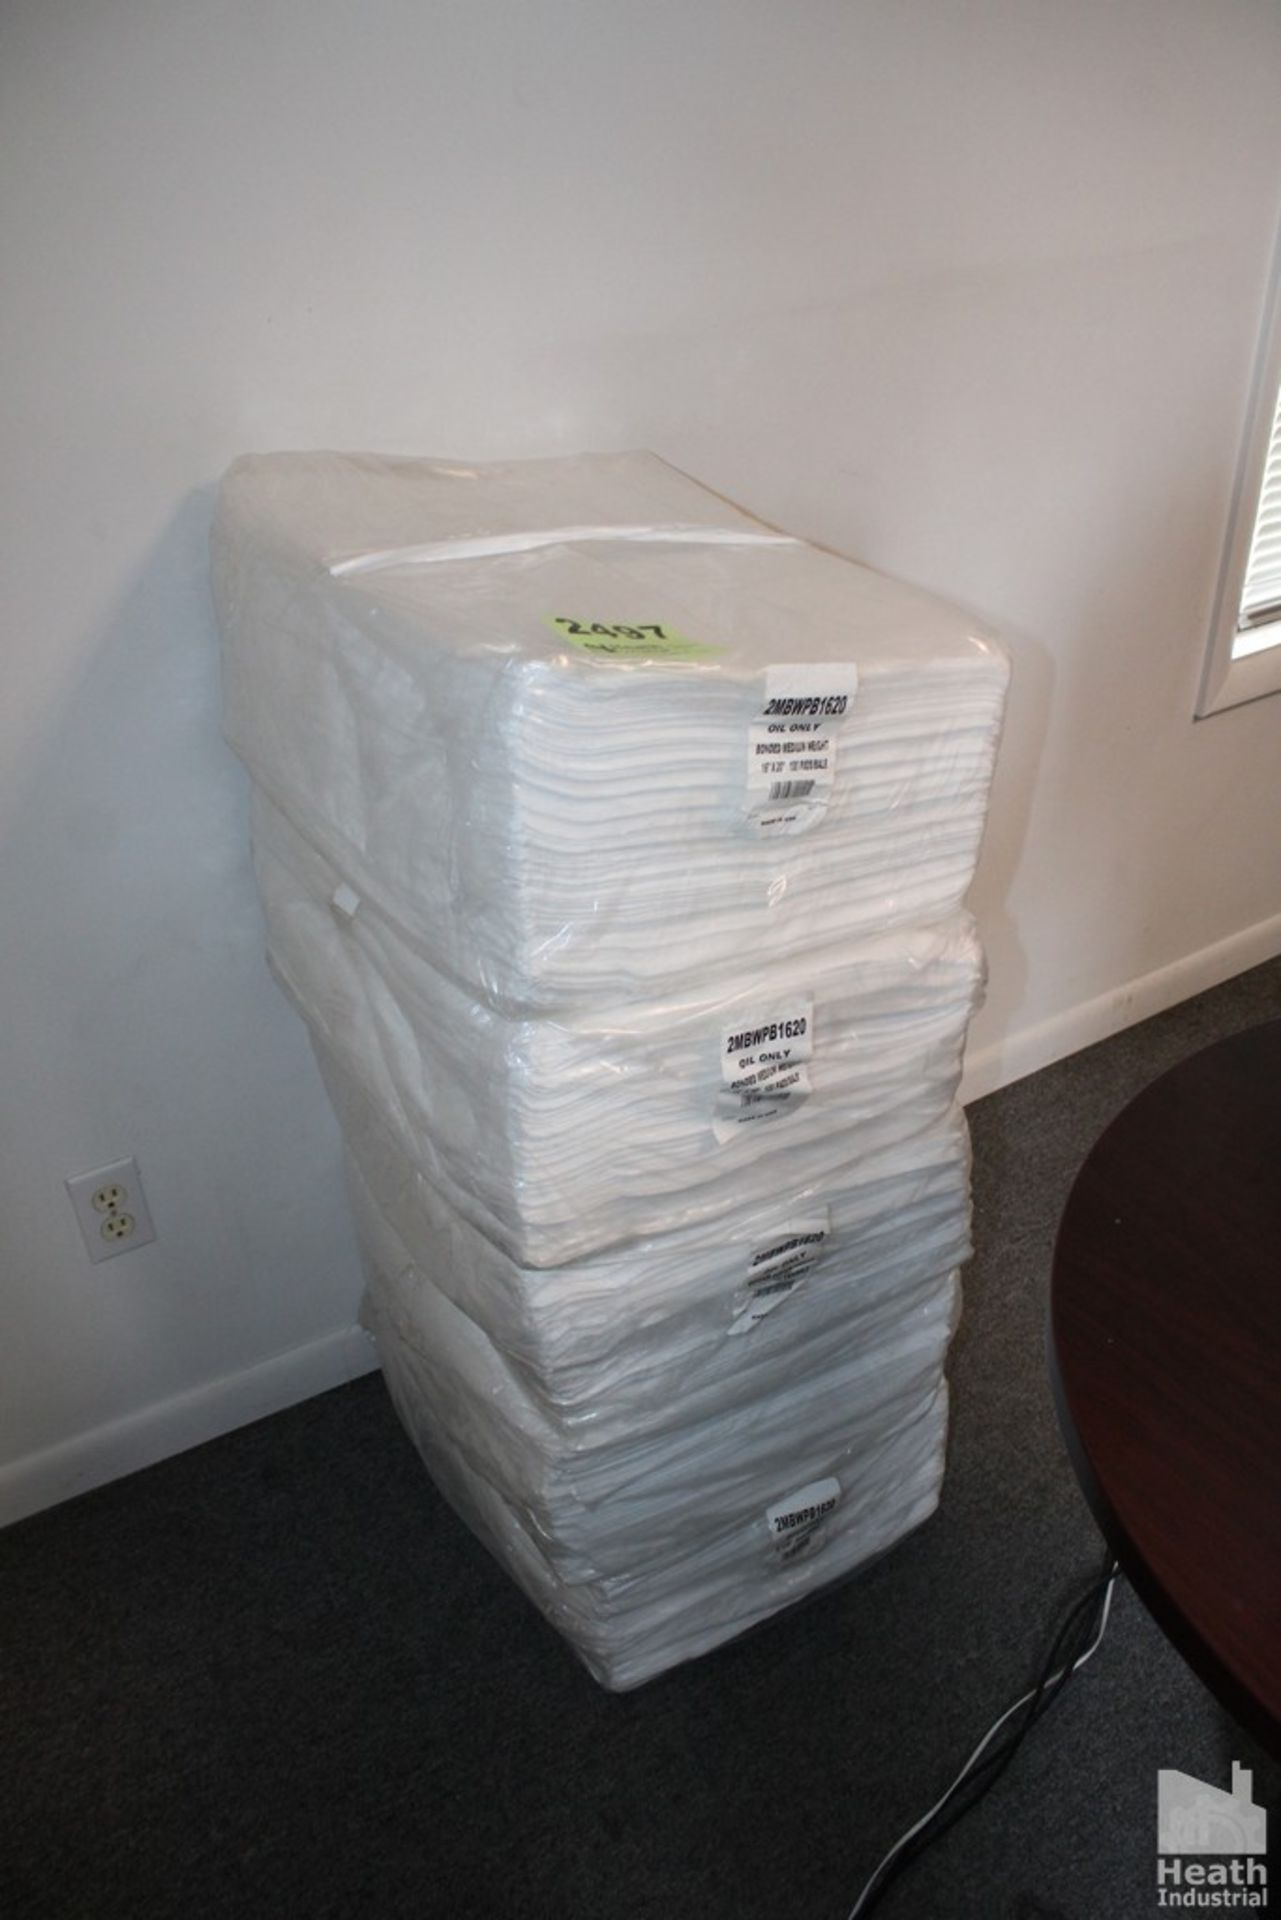 (5) CASES OF OIL ABSORBENT PADS 16" X 20", 100 PADS PER CASE